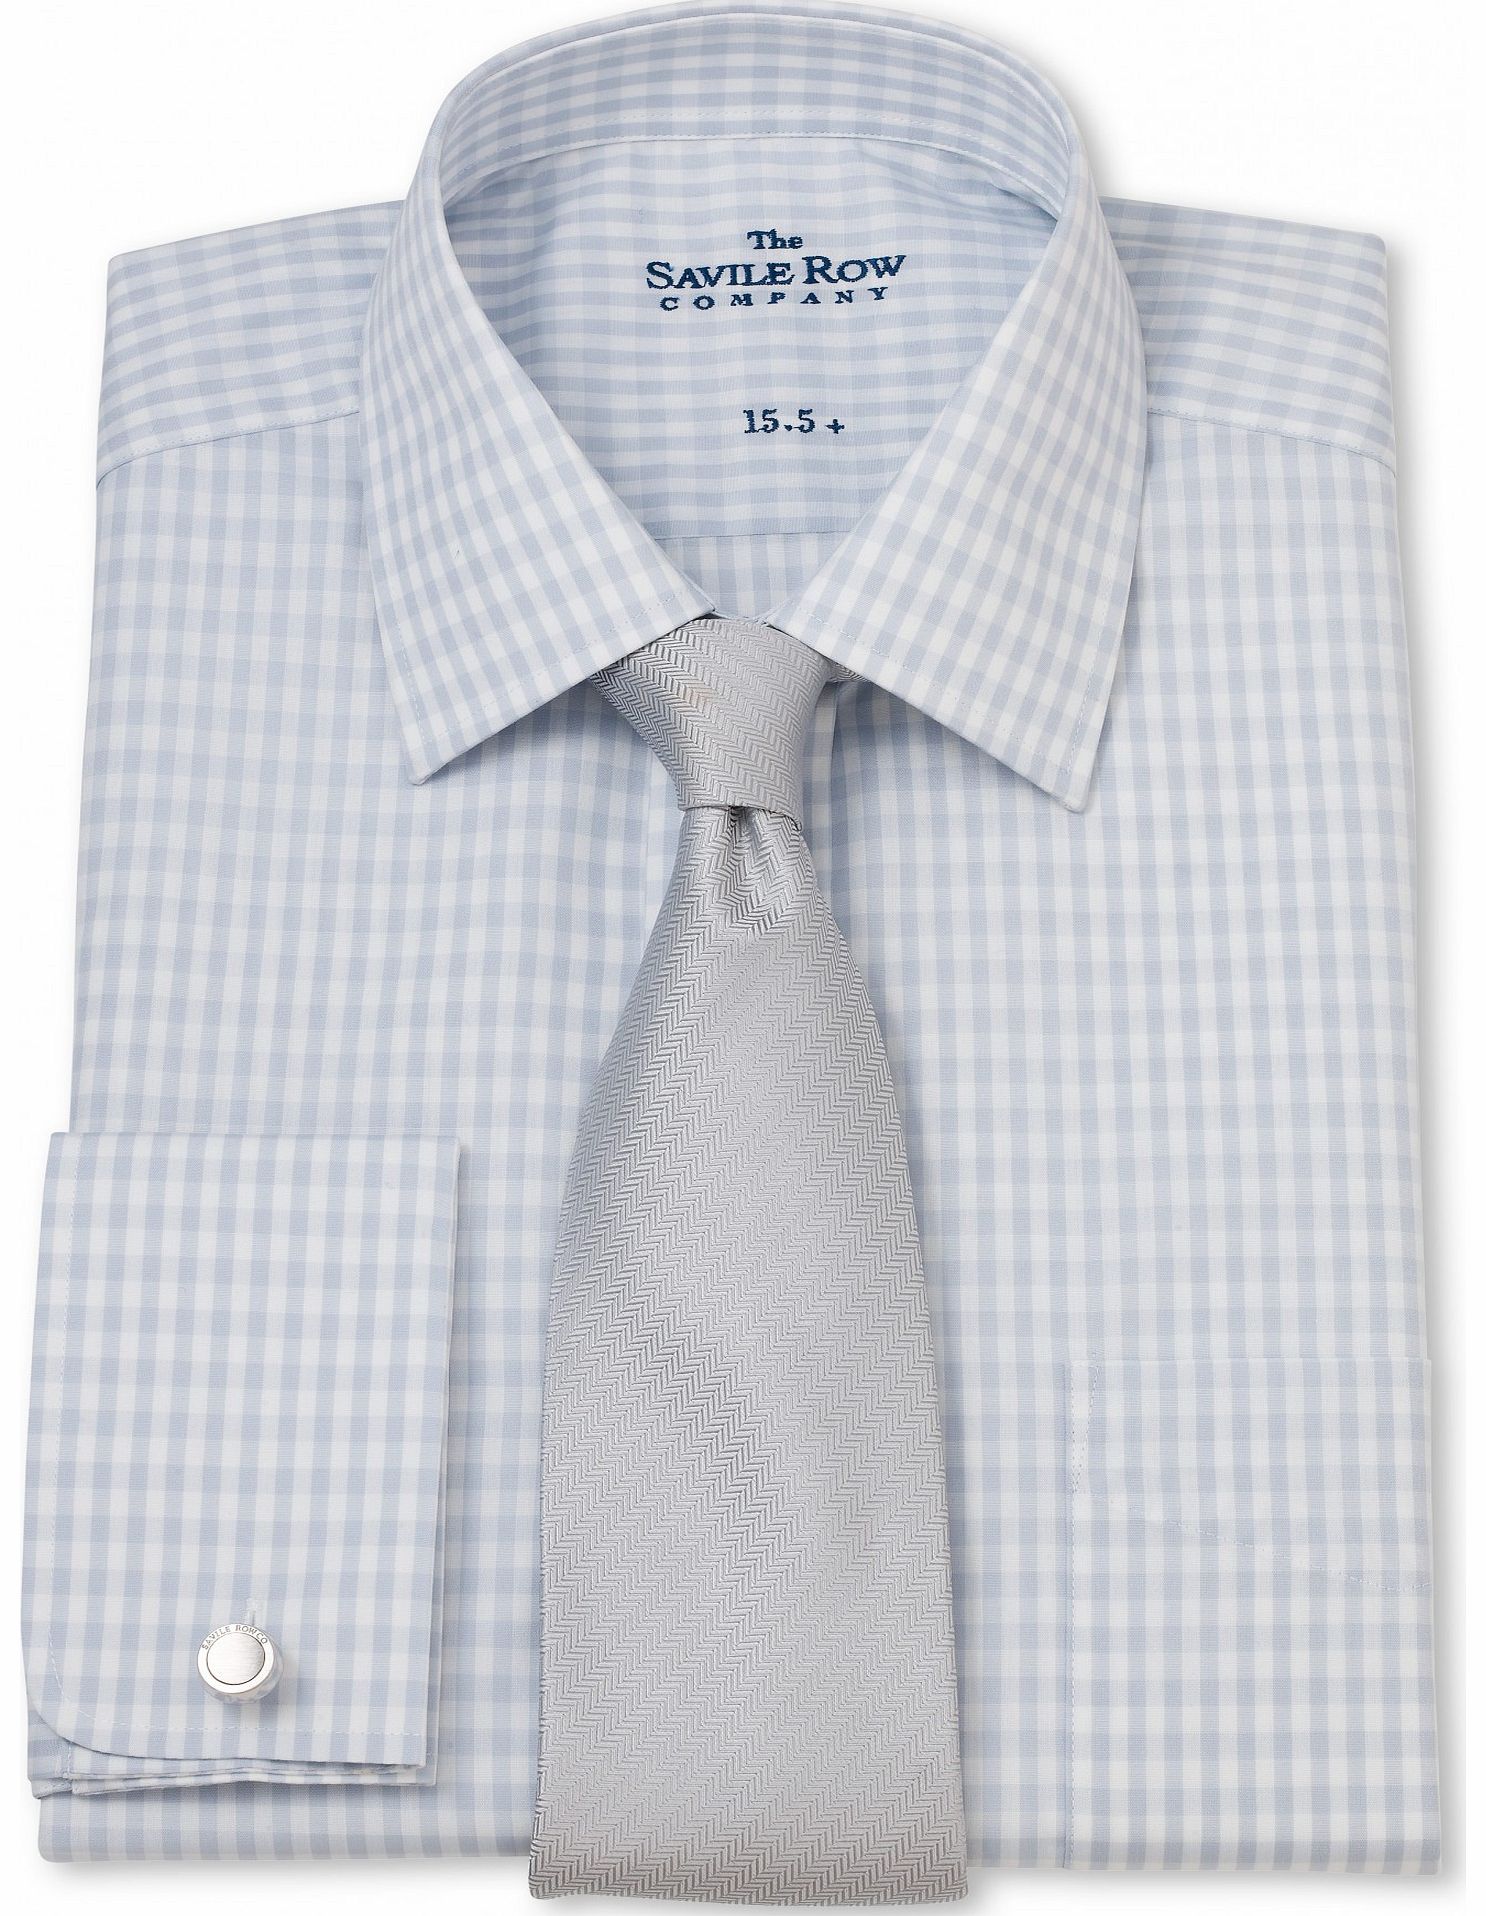 Savile Row Company Grey White Gingham Check Classic Fit Shirt 16